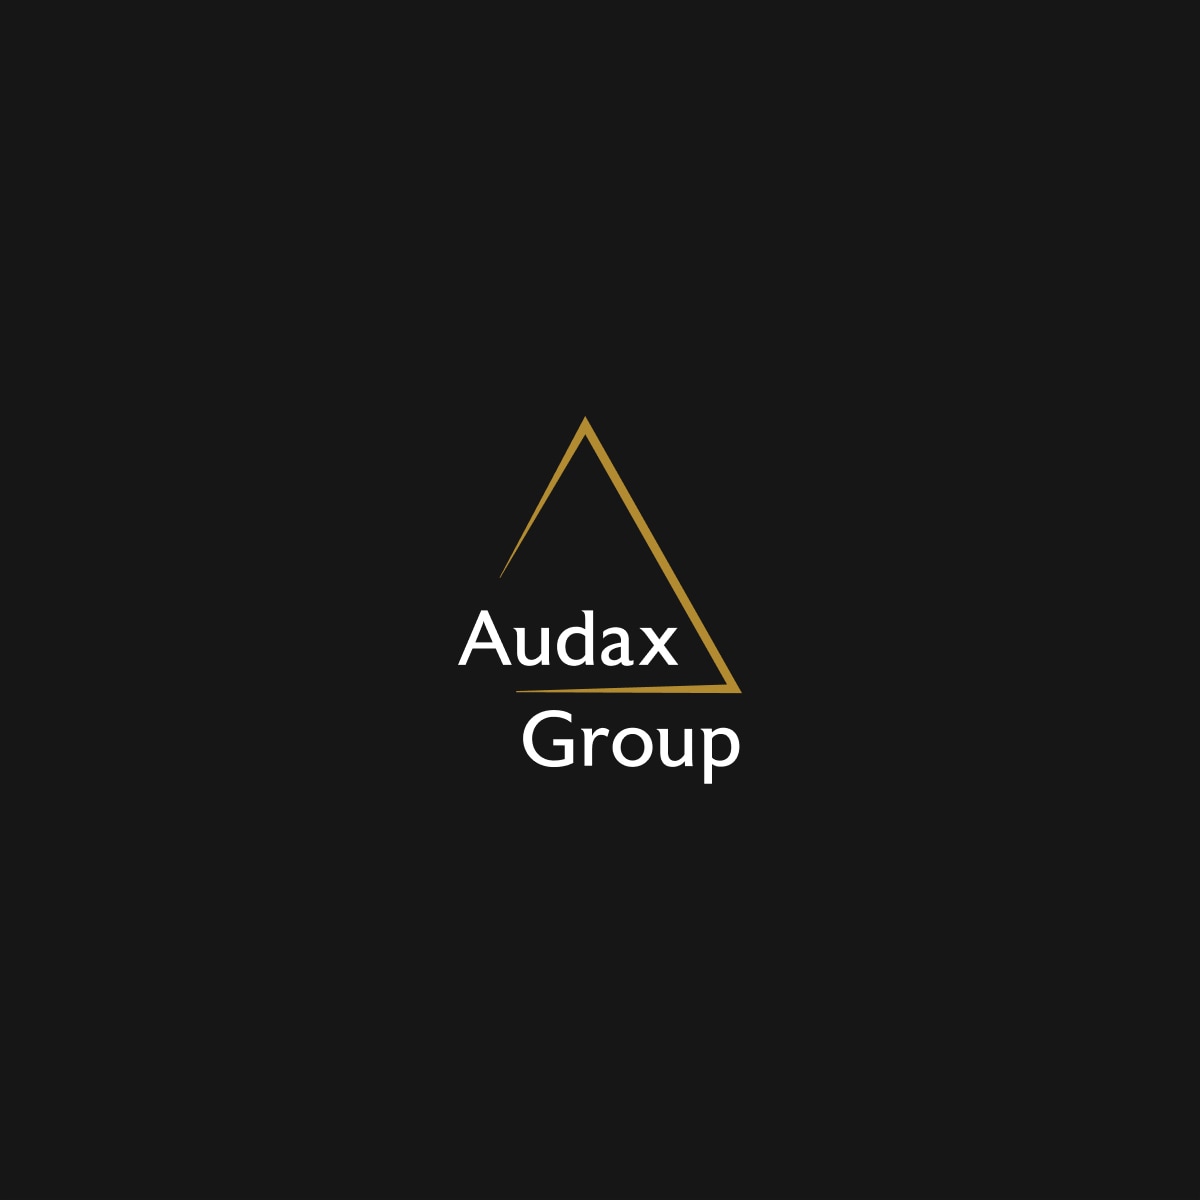 Audax Group Overview